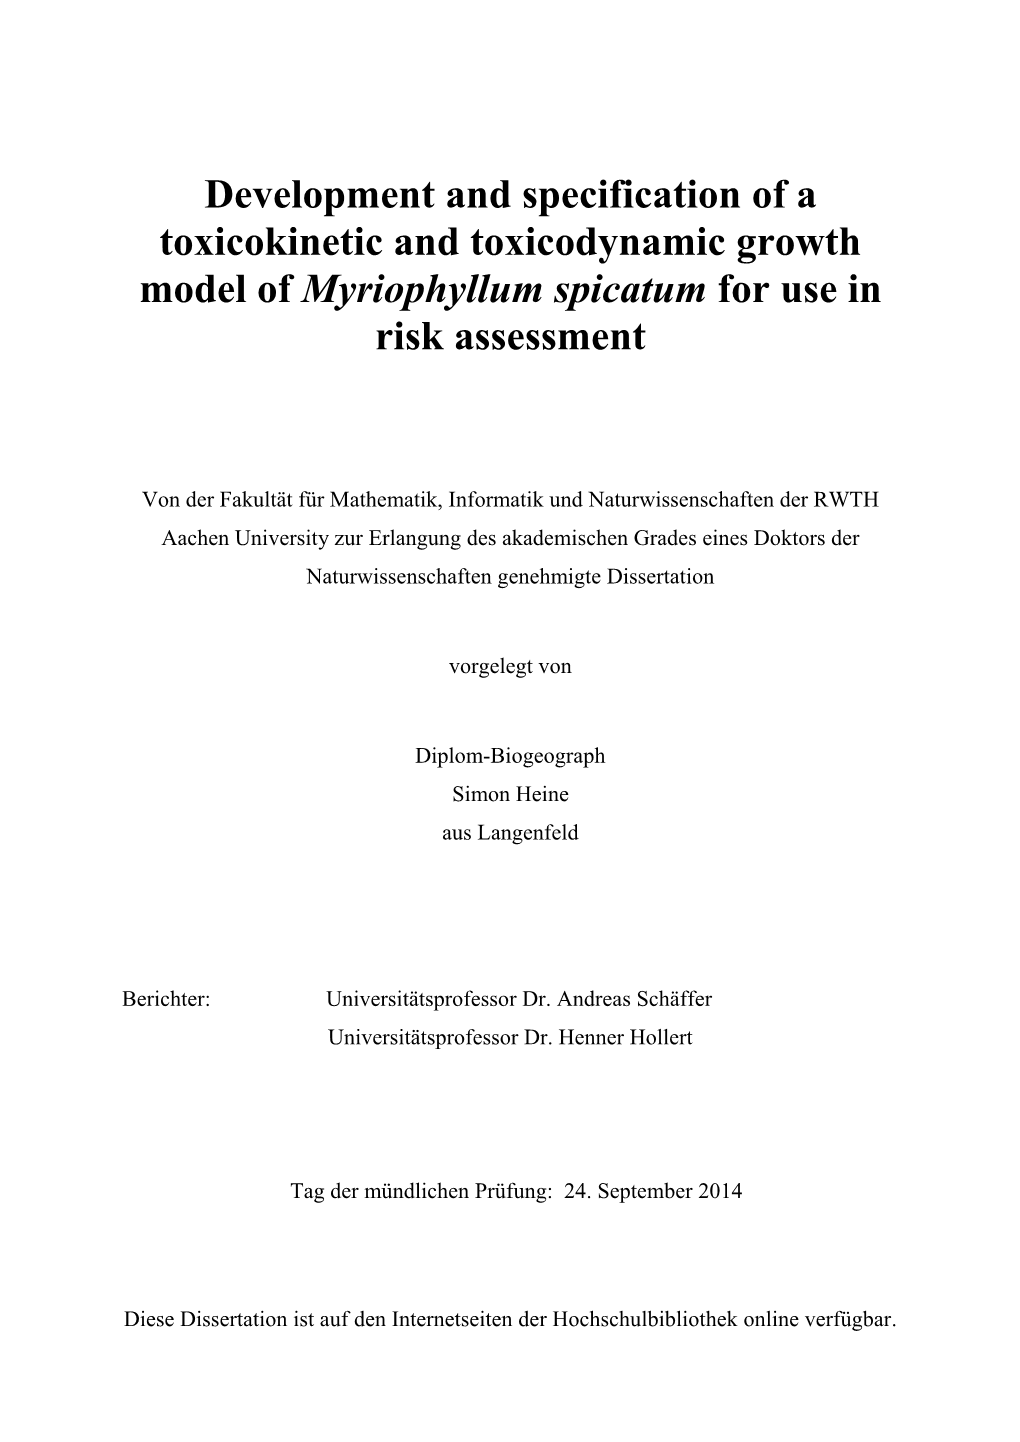 Development and Specification of a Toxicokinetic and Toxicodynamic Growth Model of Myriophyllum Spicatum for Use in Risk Assessment